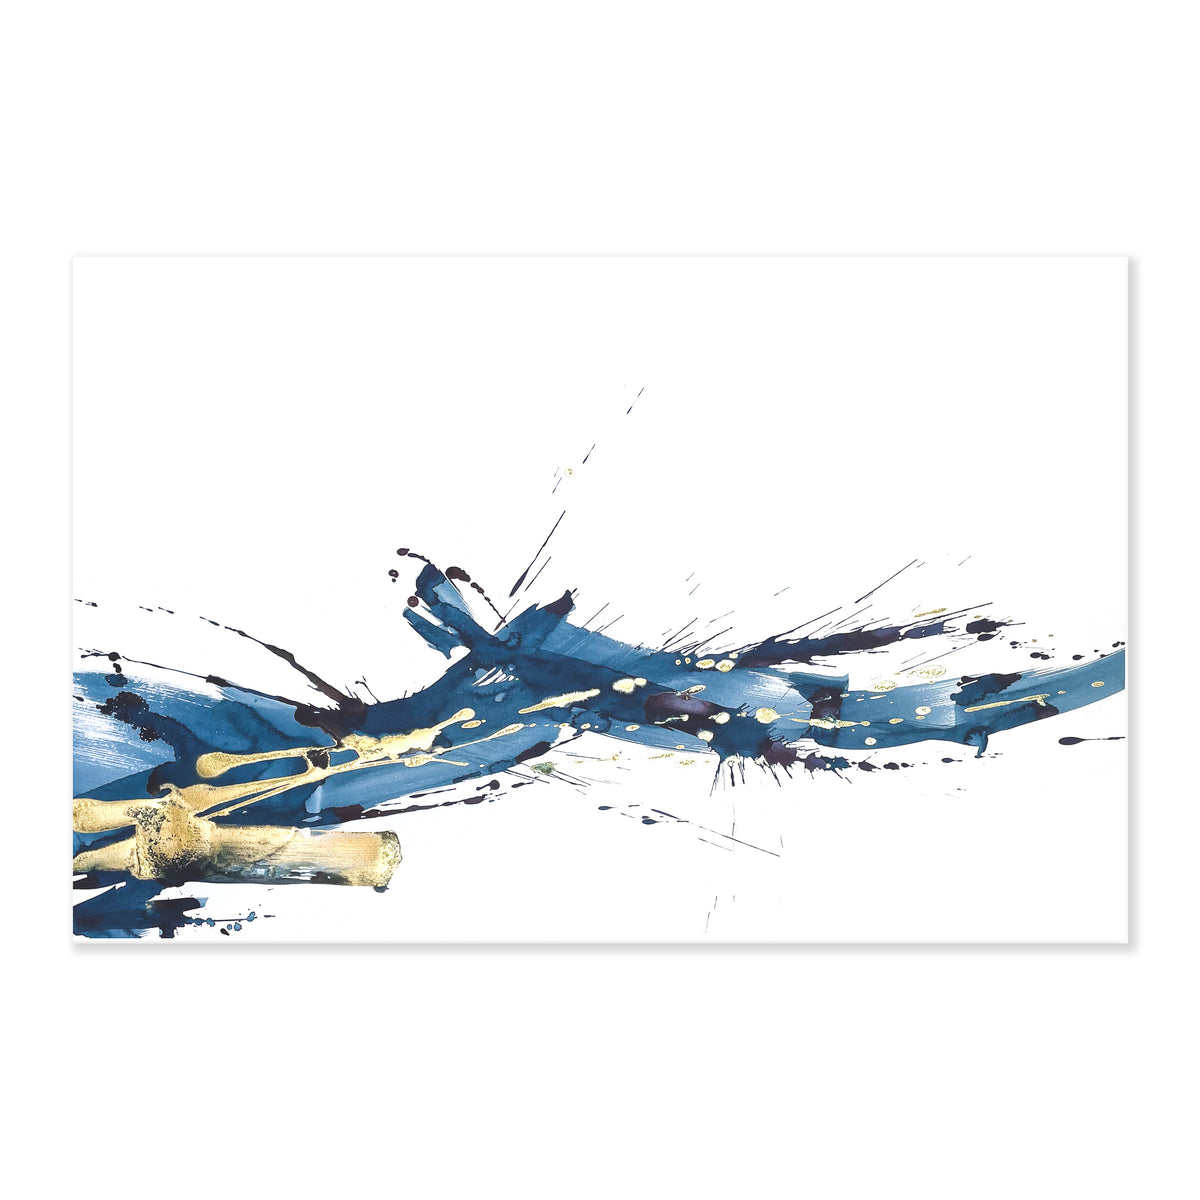 An original abstract painting illustrating brush strokes and splatter featuring gold detail painted with watercolor on a soft white background